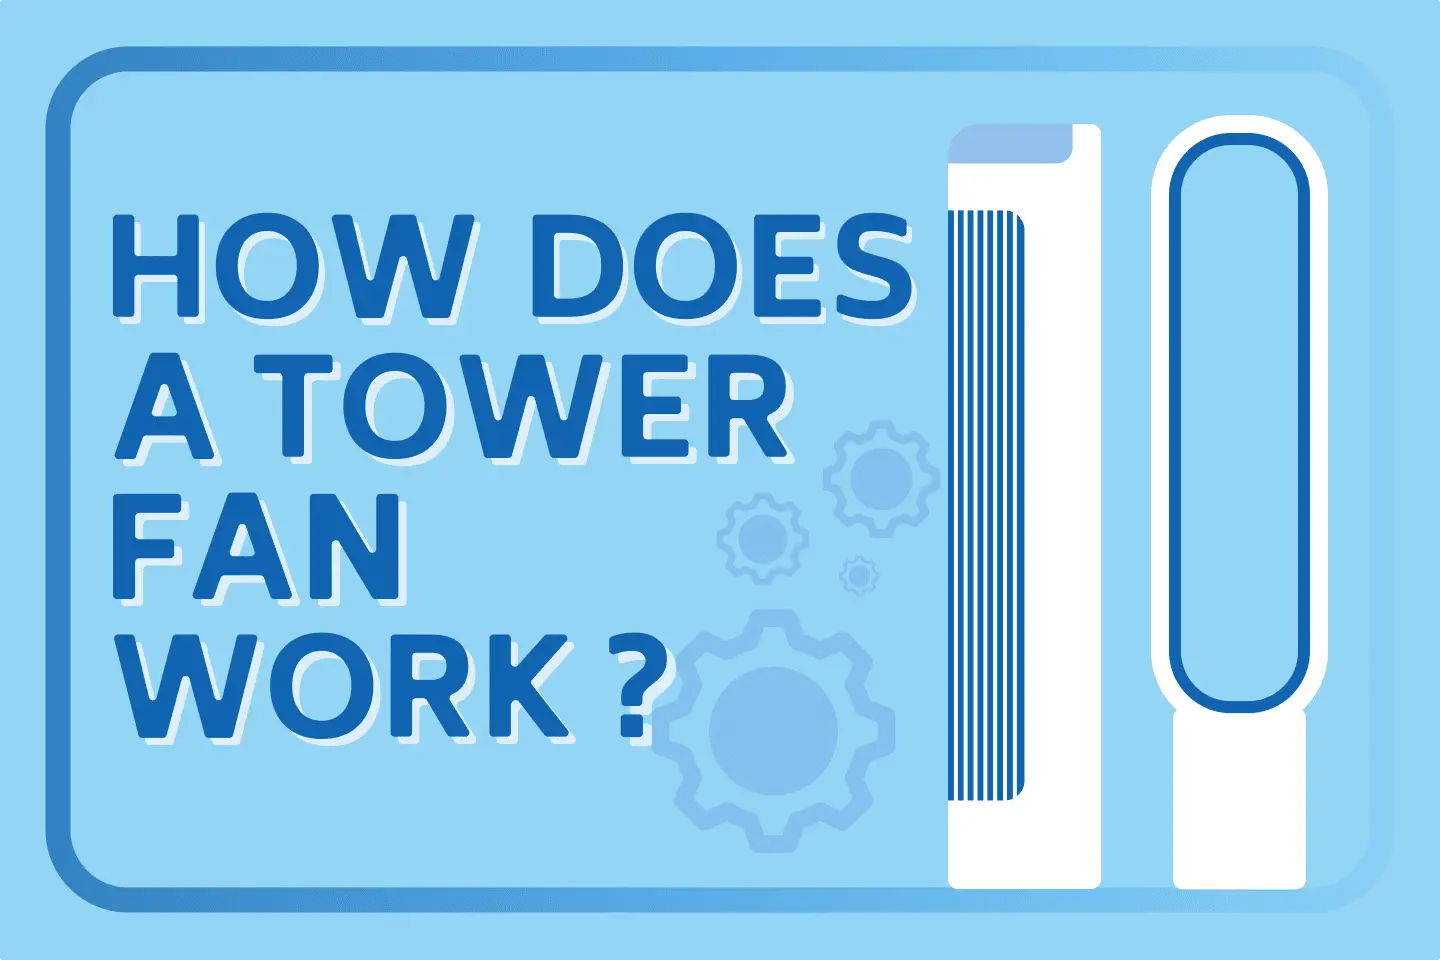 How Does A Tower Fan Work? [Quick Explanation]